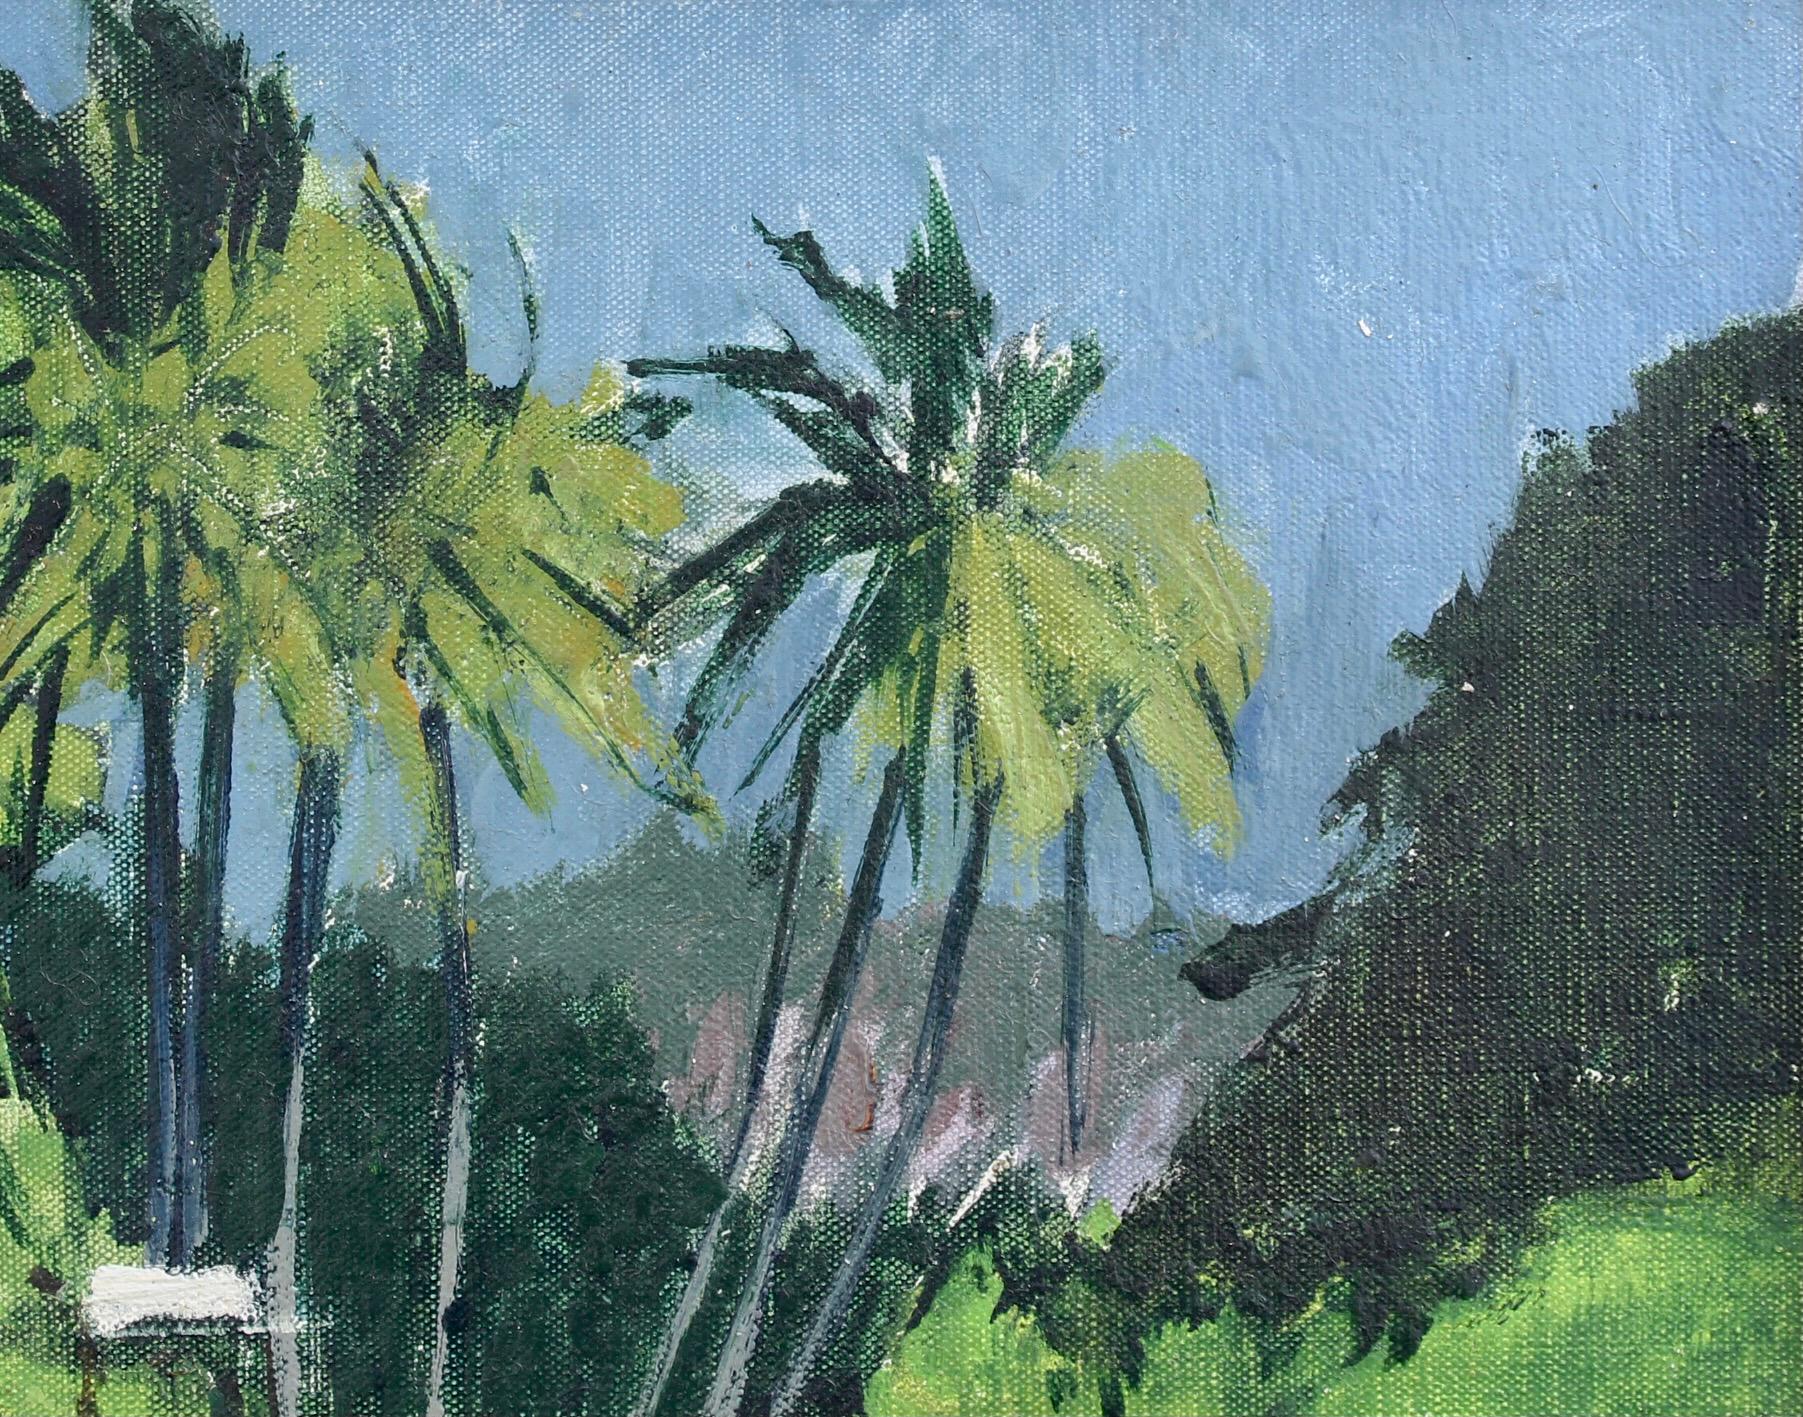 'Dusk on Schoelcher Lagoon Martinique', oil on canvas, by Robert Humblot (1959). The third in a series of artworks completed in 1959 when the artist visited the French Antilles. He painted several colourful pieces depicting life on the islands which